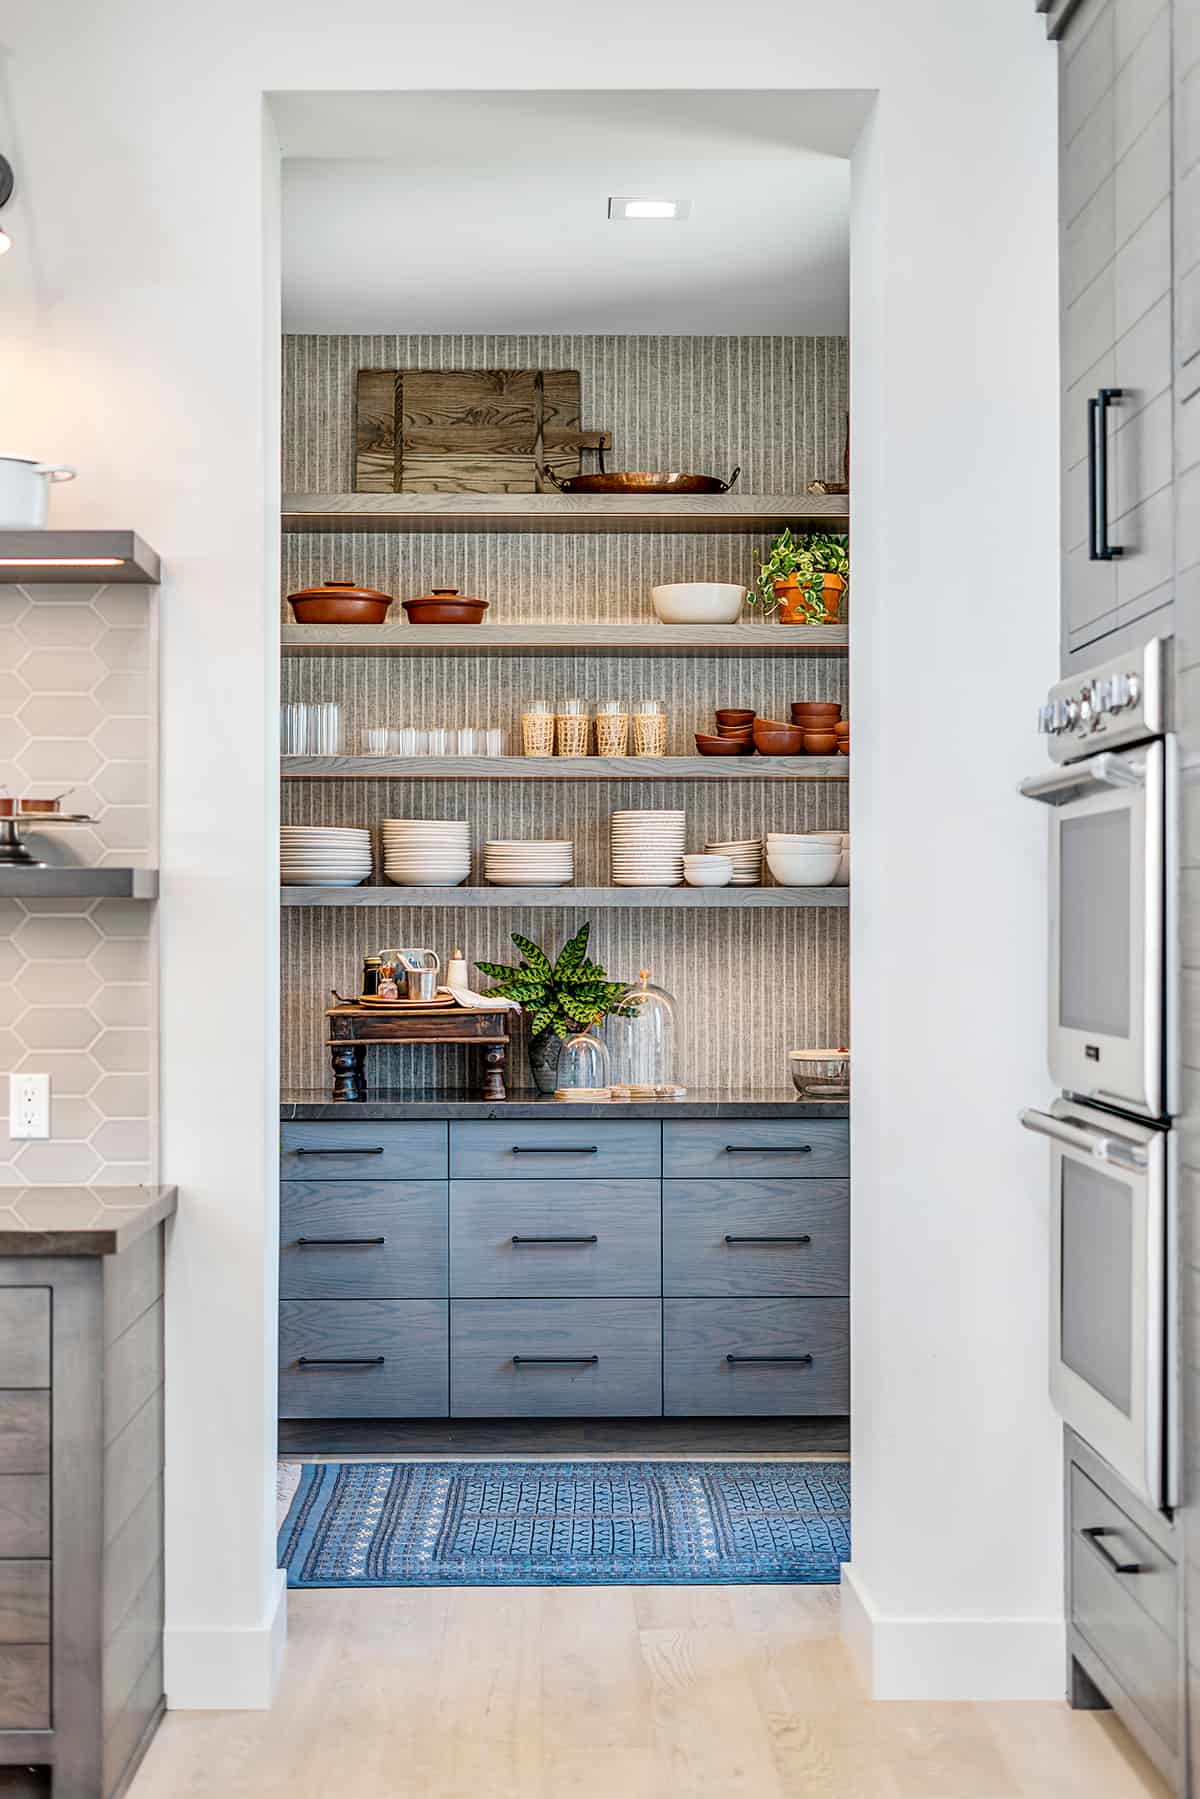 A butler's pantry nook turned with open shelving and blue cabinets. Shelves hold dishes and cookware.